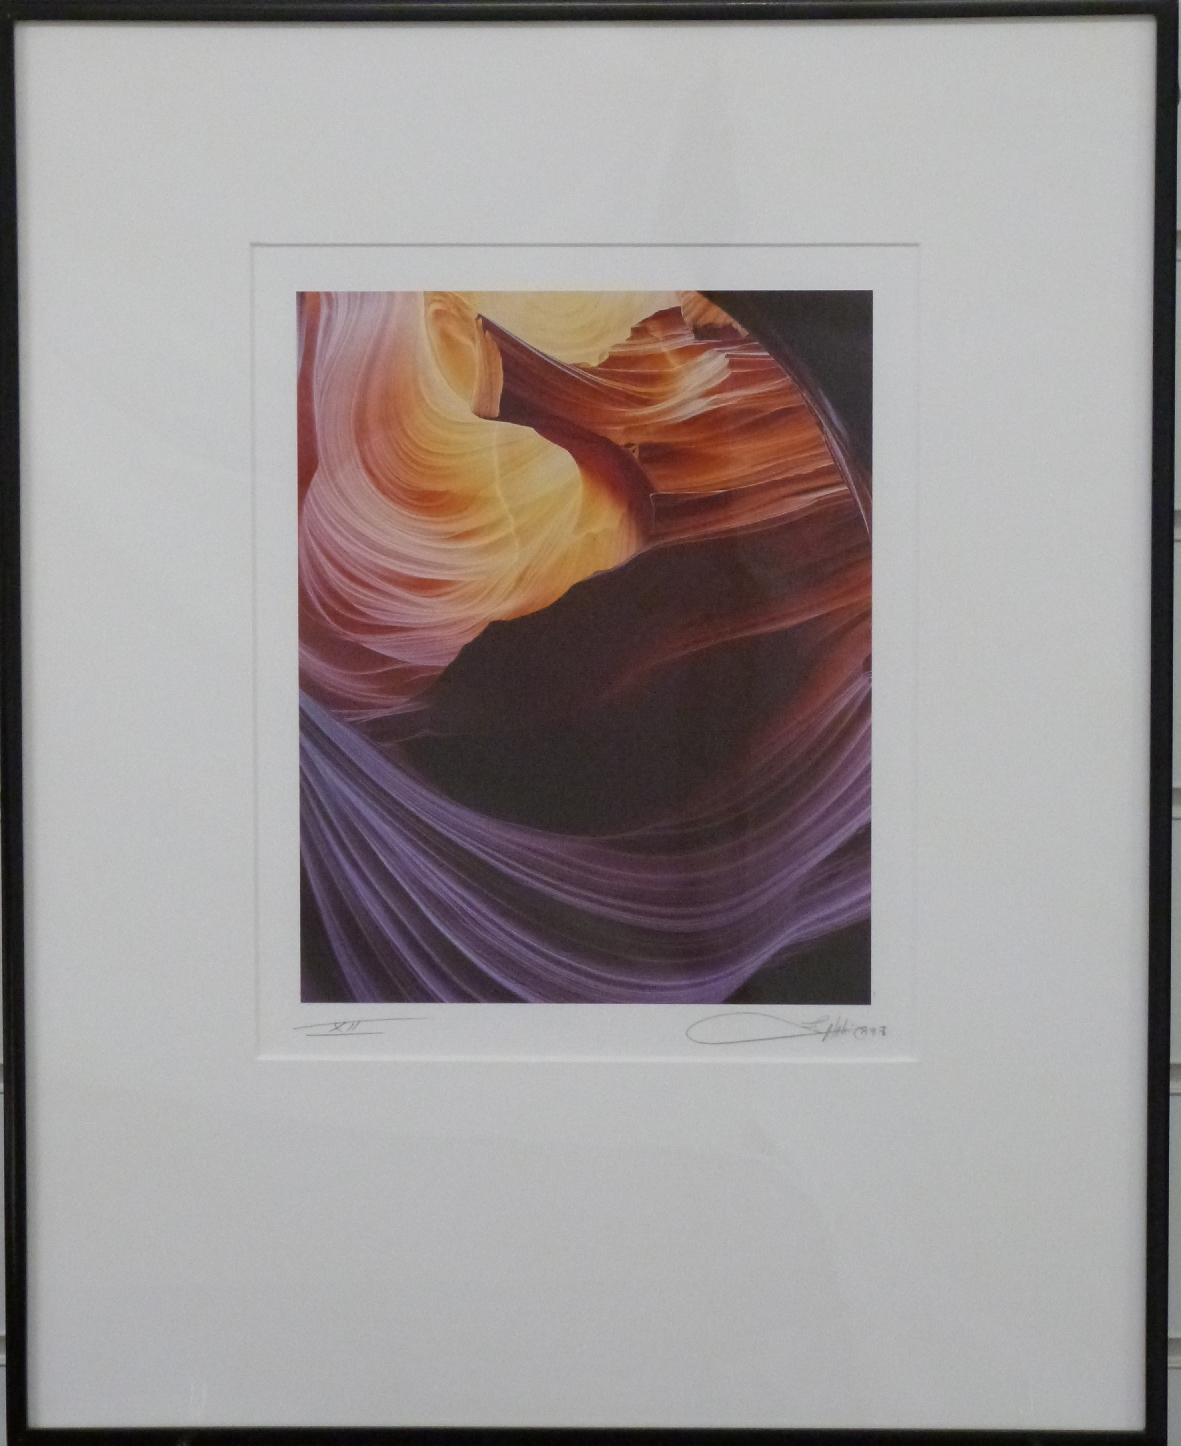 Michael Fatali, Cibachrome print, signed photo Gabriel's Horn, no XII, 28.5 x 23cm, with certificate - Image 5 of 5